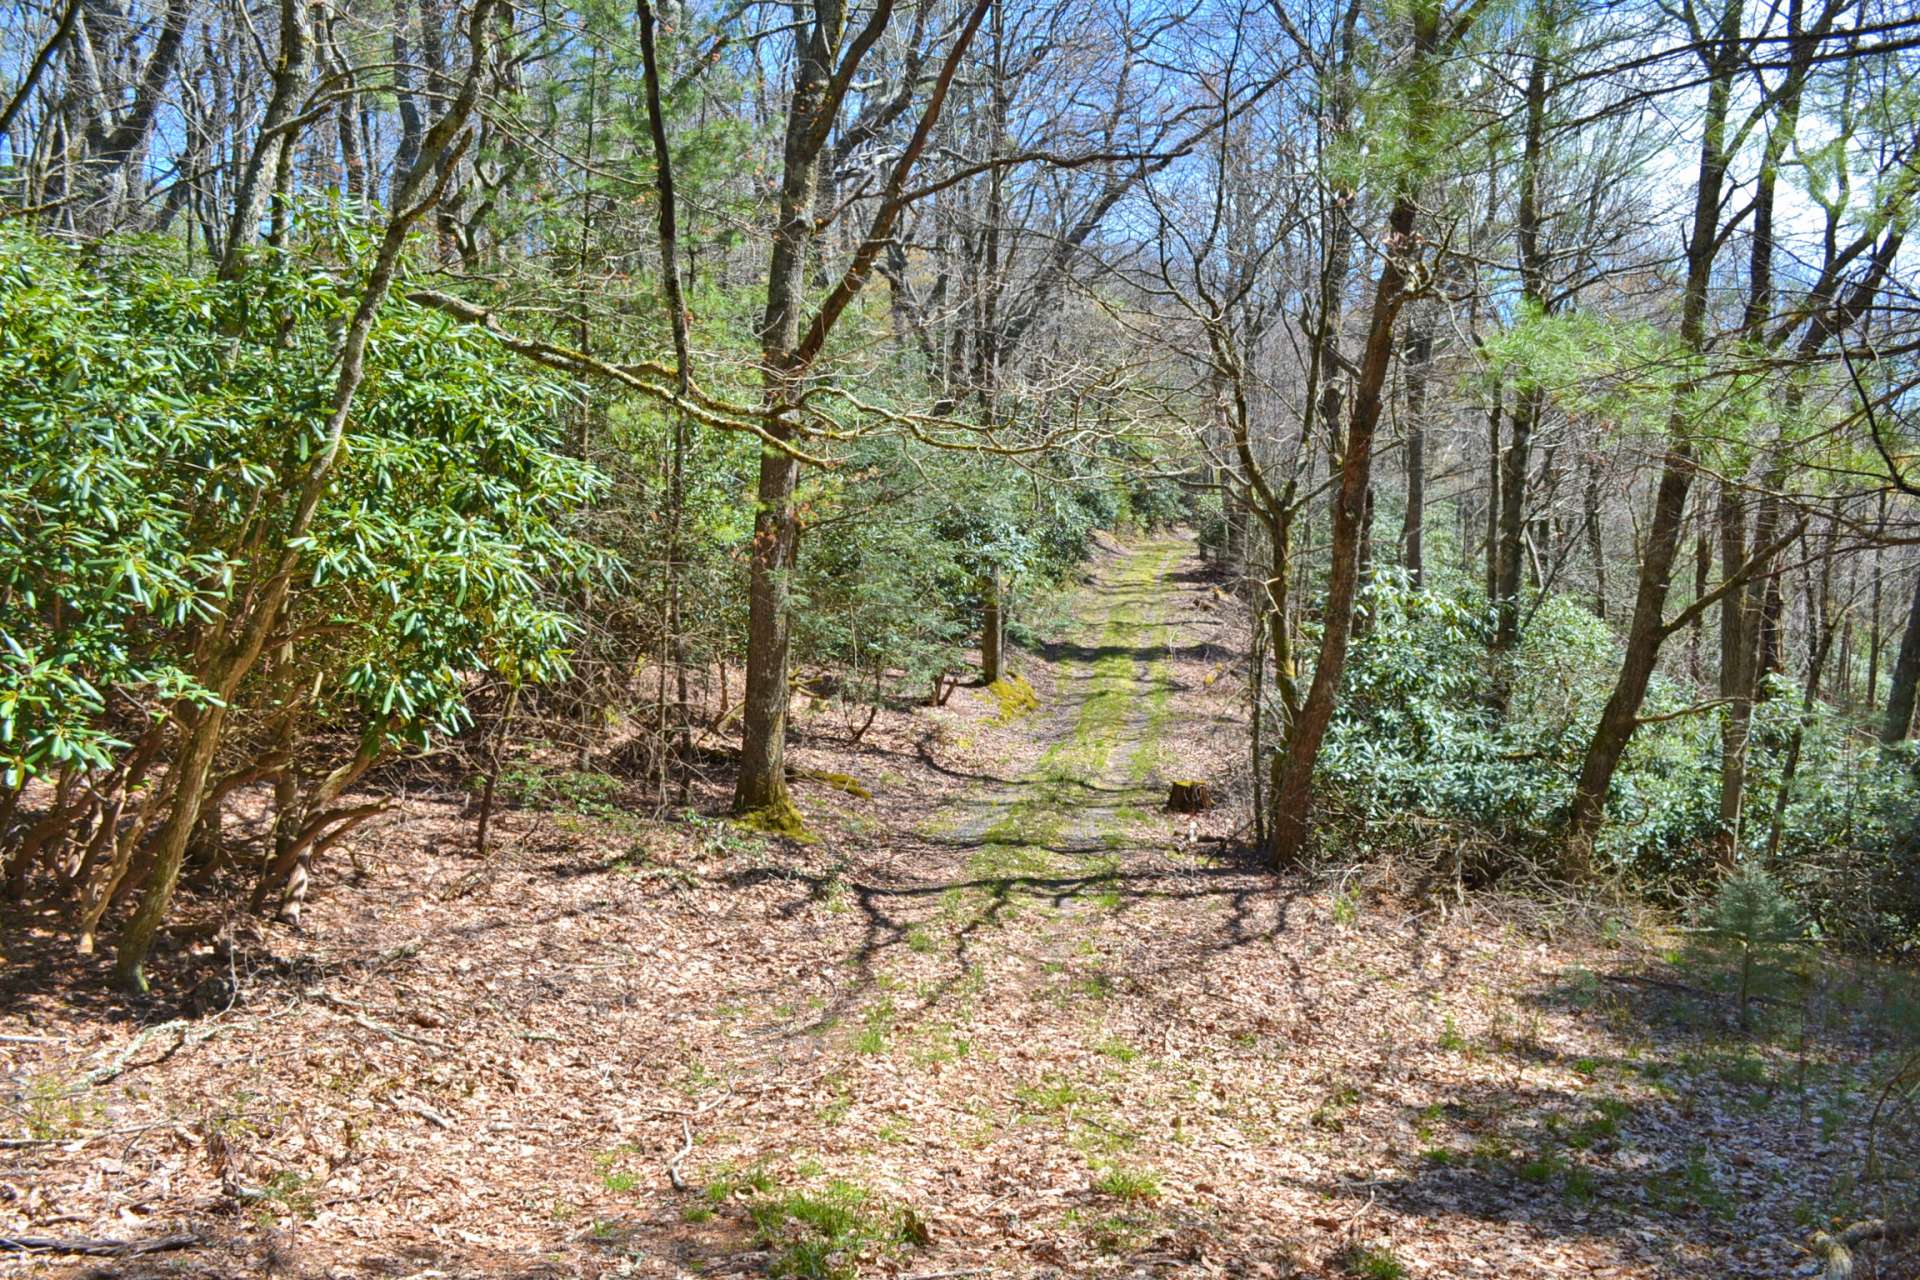 A hunter’s paradise, this tract offers vast woodlands with a diverse mixture of hardwoods, conifers and native mountain foliage.  Plenty of opportunities to hike, hunt or just explore on your own private property.